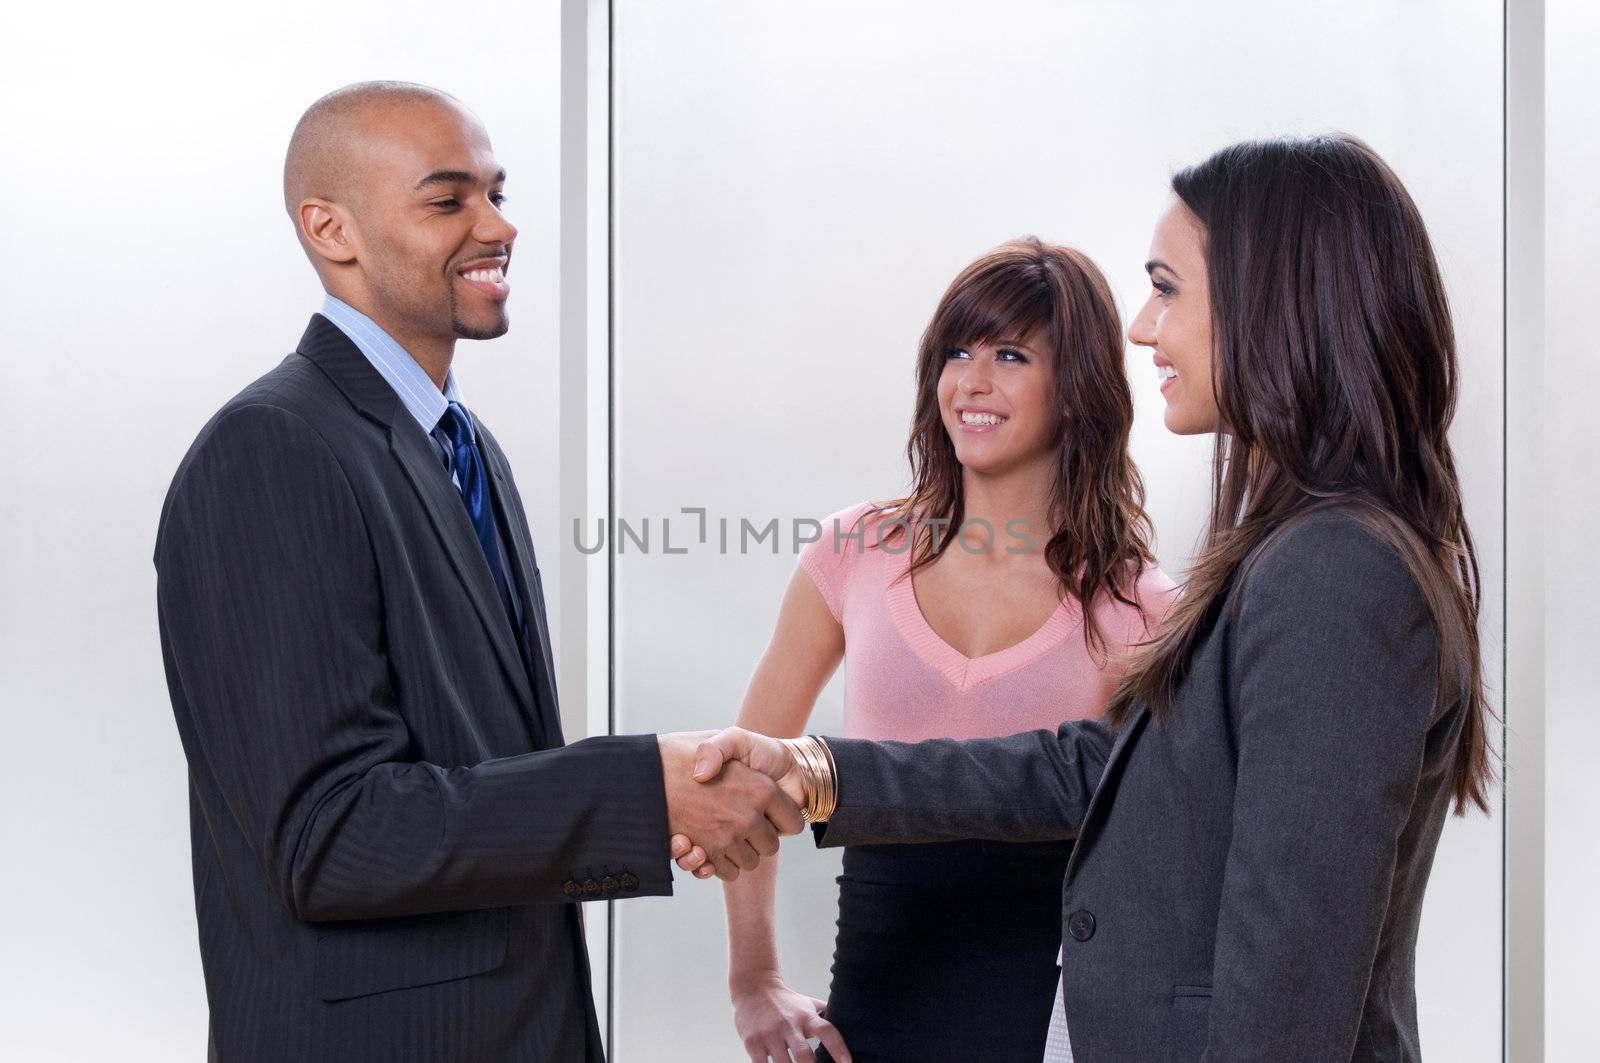 Business team of three, man and woman shaking hands and smiling.